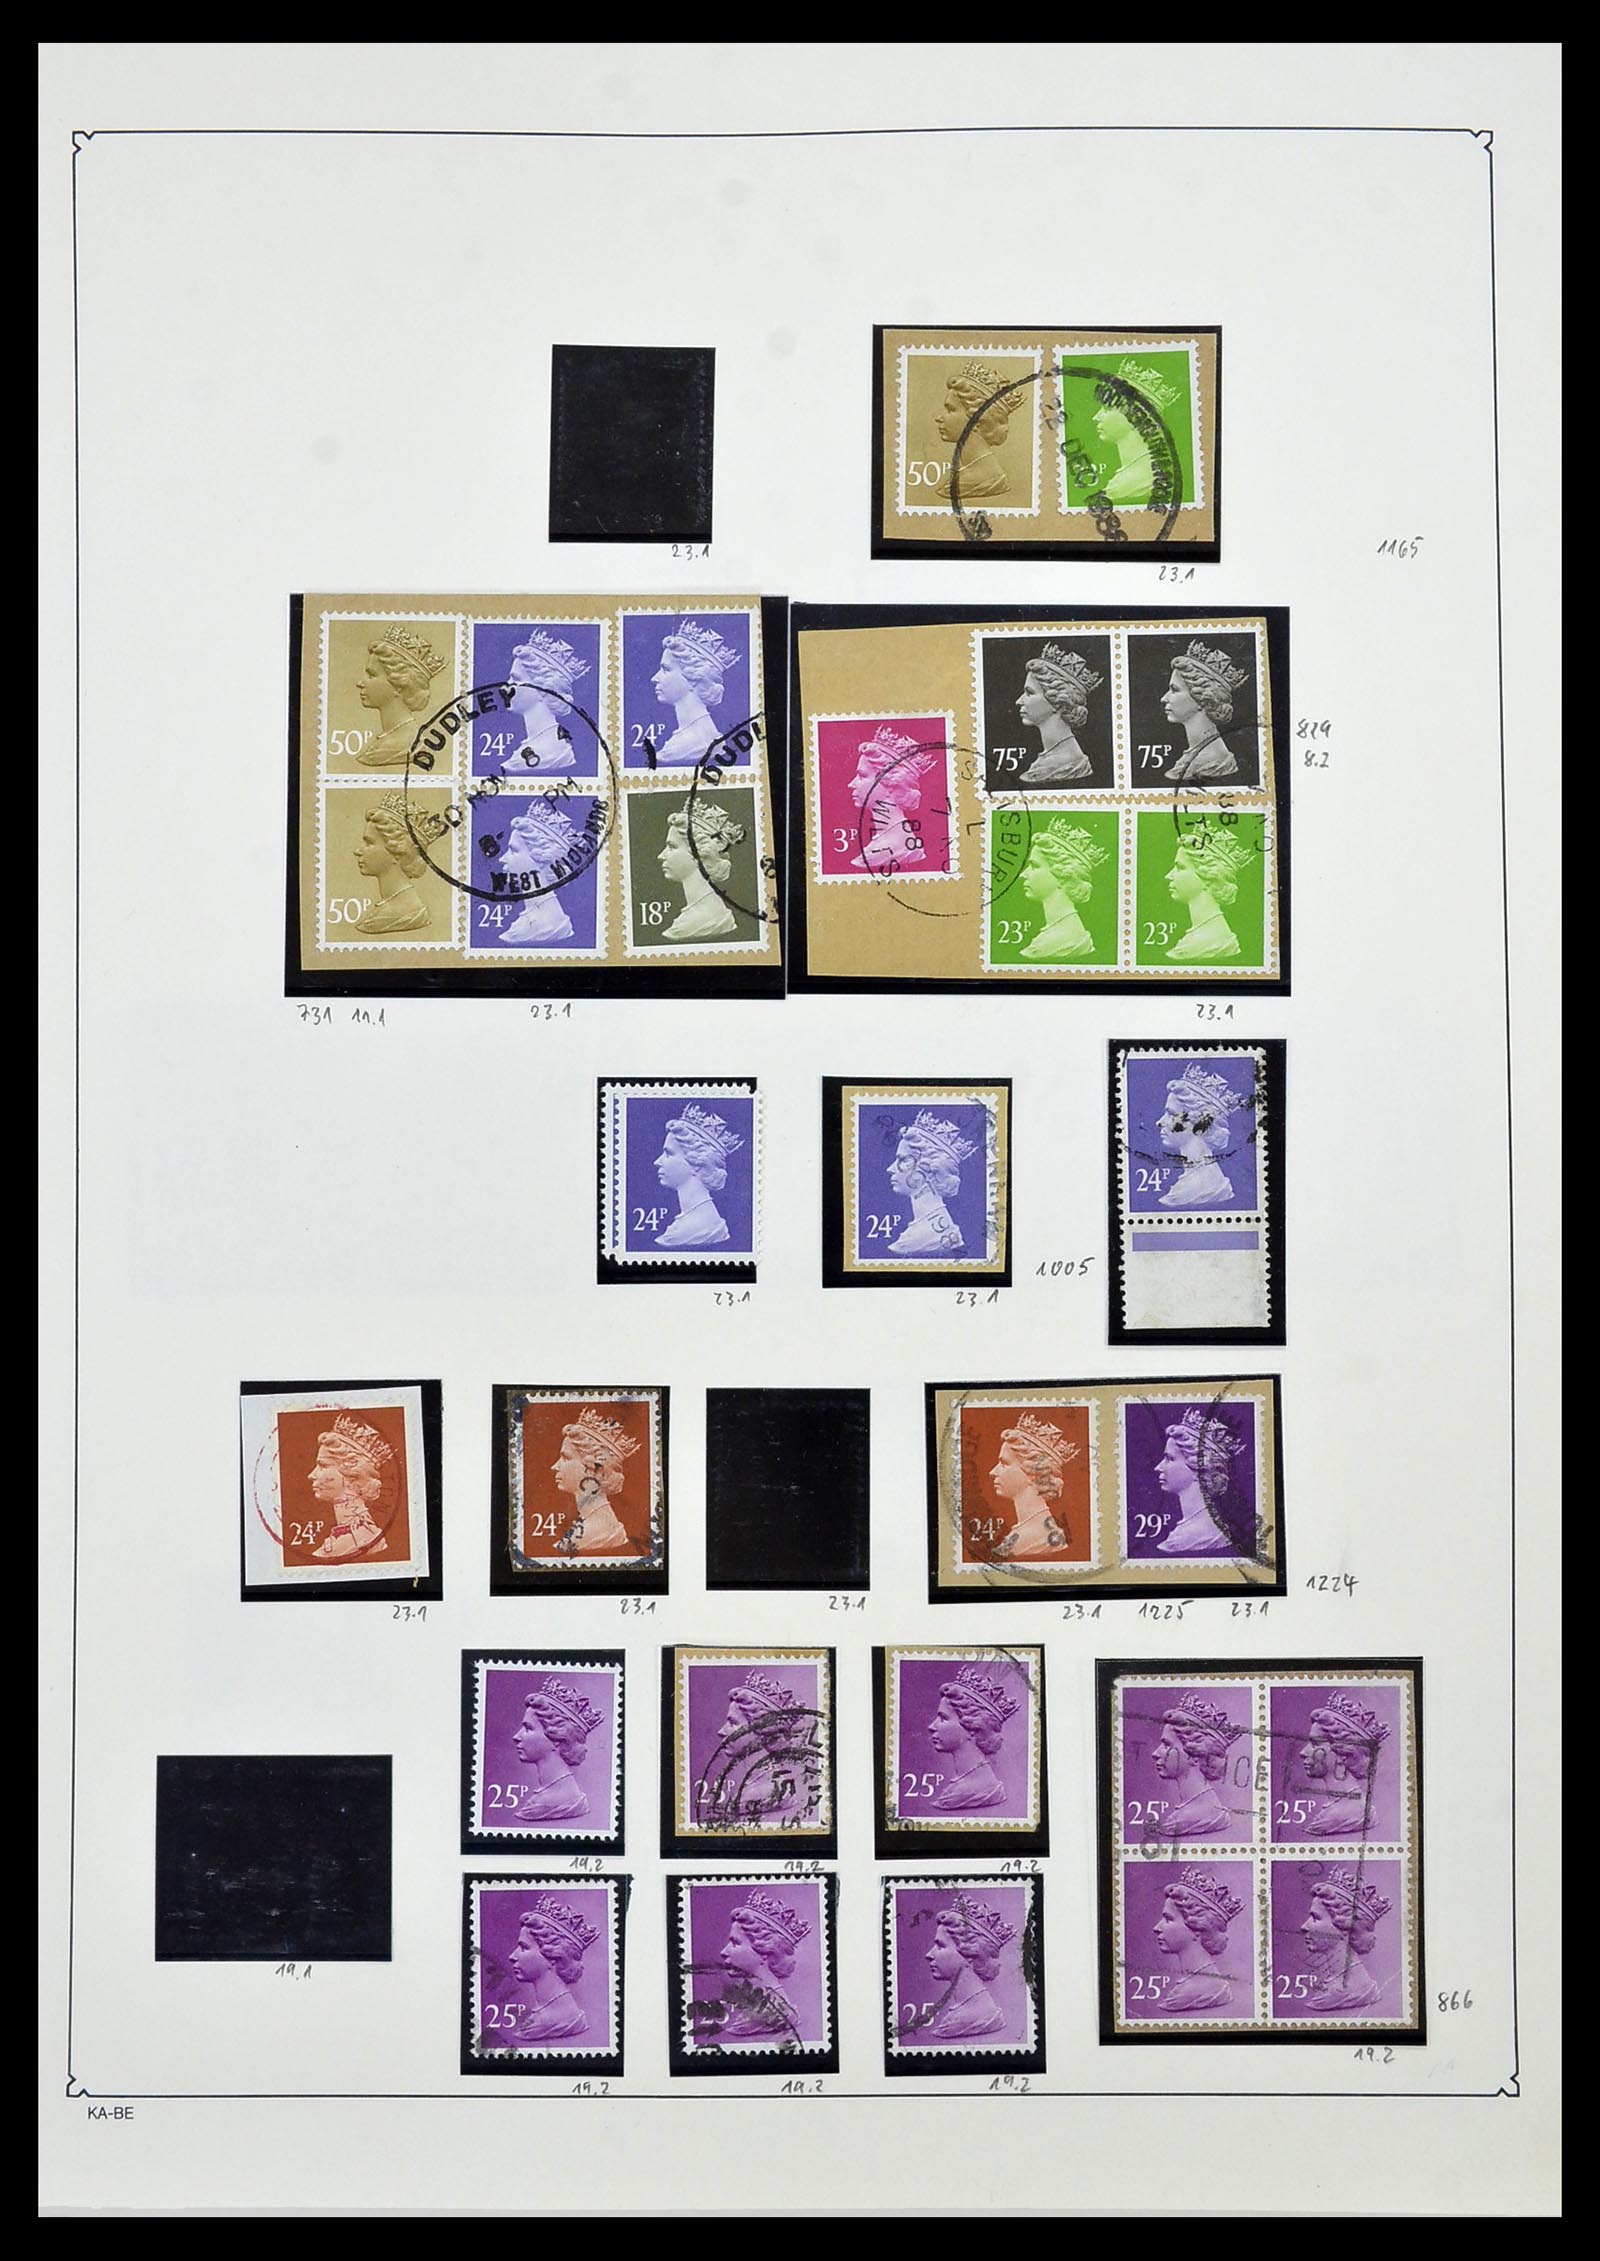 34221 098 - Stamp collection 34221 Great Britain Machins/castles 1971-2005.